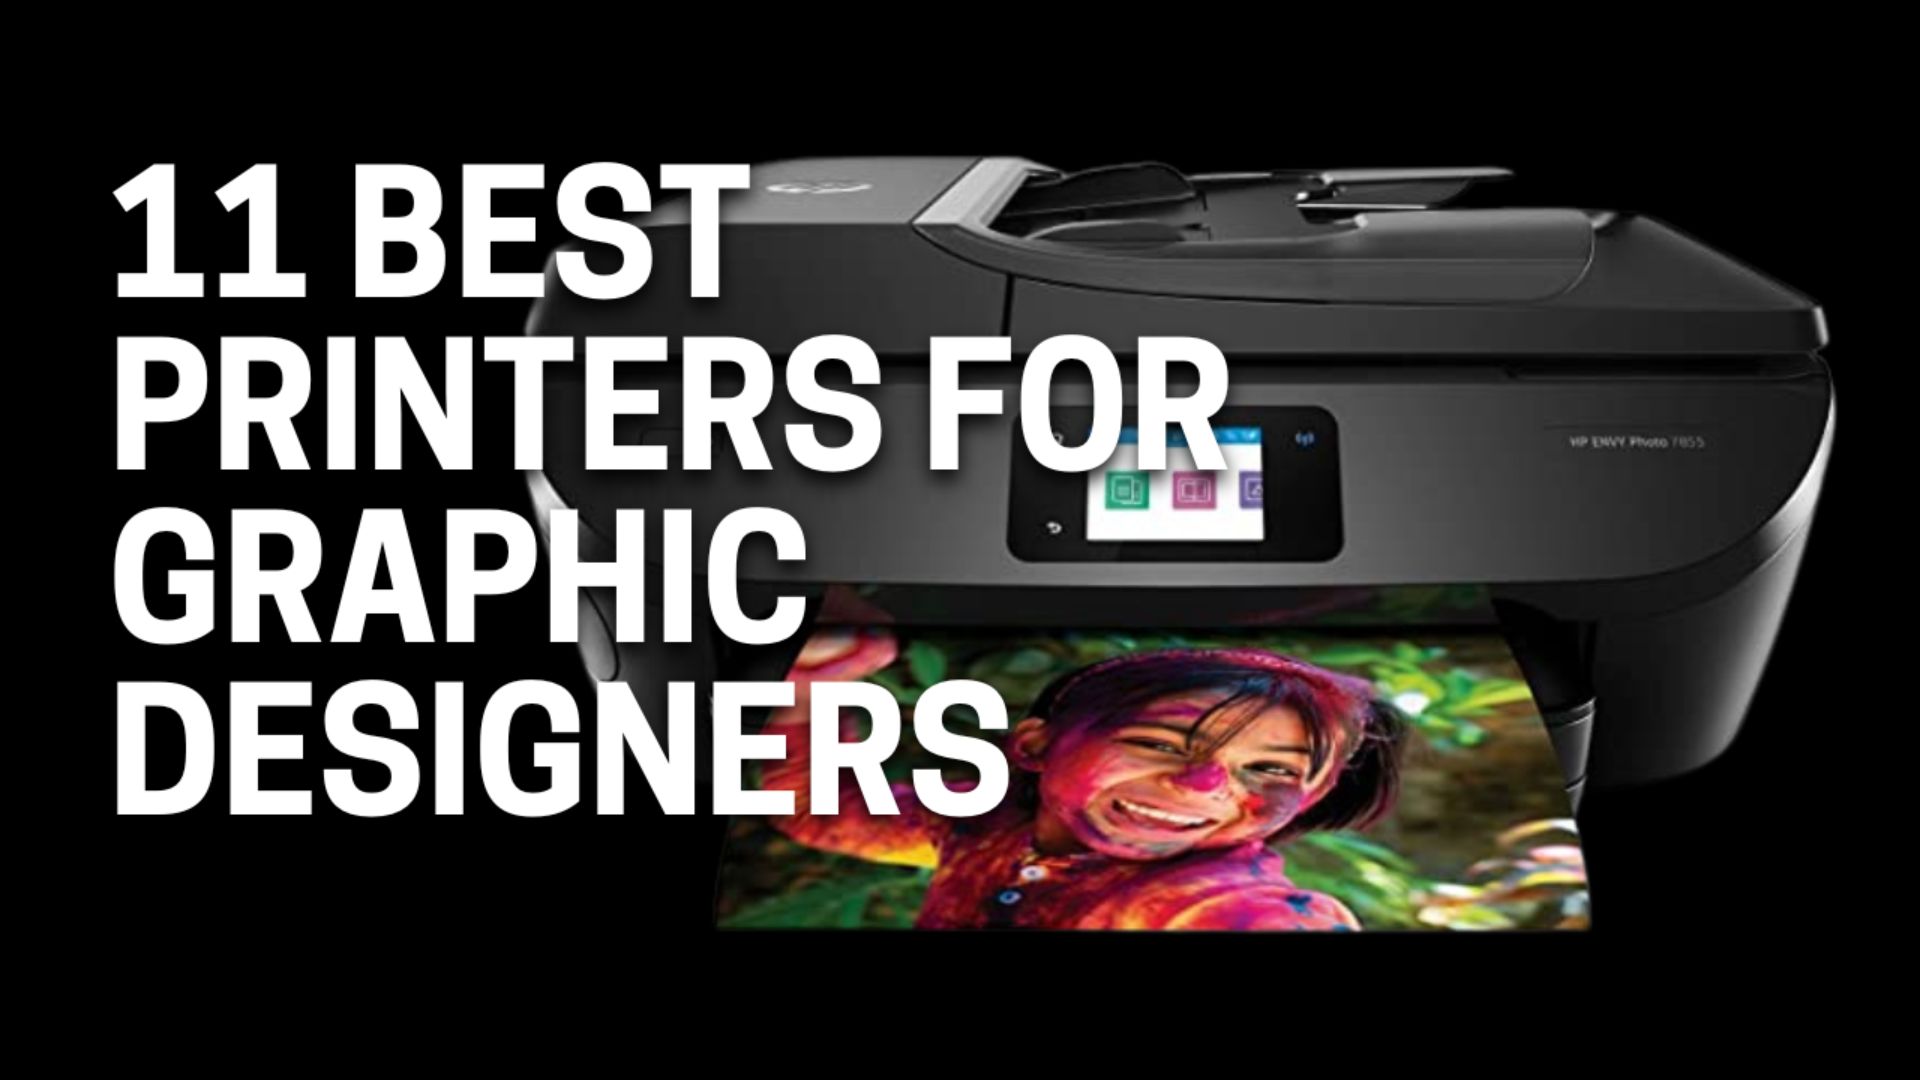 11 Best Printer for Graphic Designers